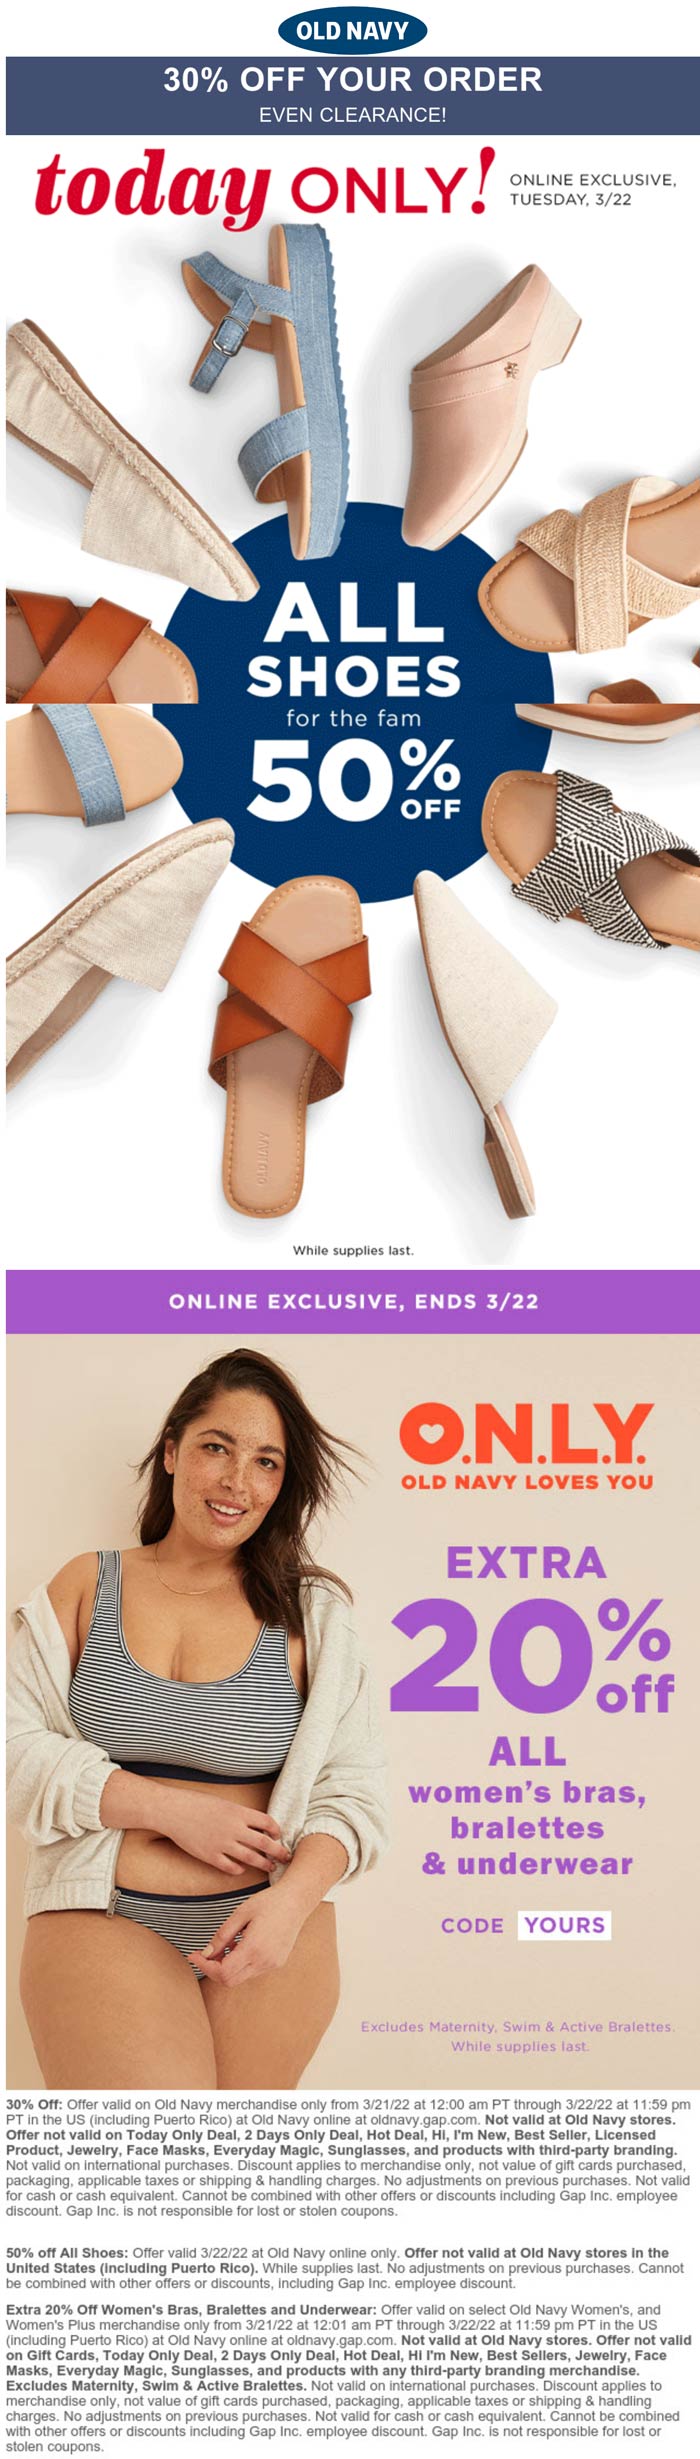 Old Navy stores Coupon  30% off everything & 50% off shoes online today at Old Navy #oldnavy 